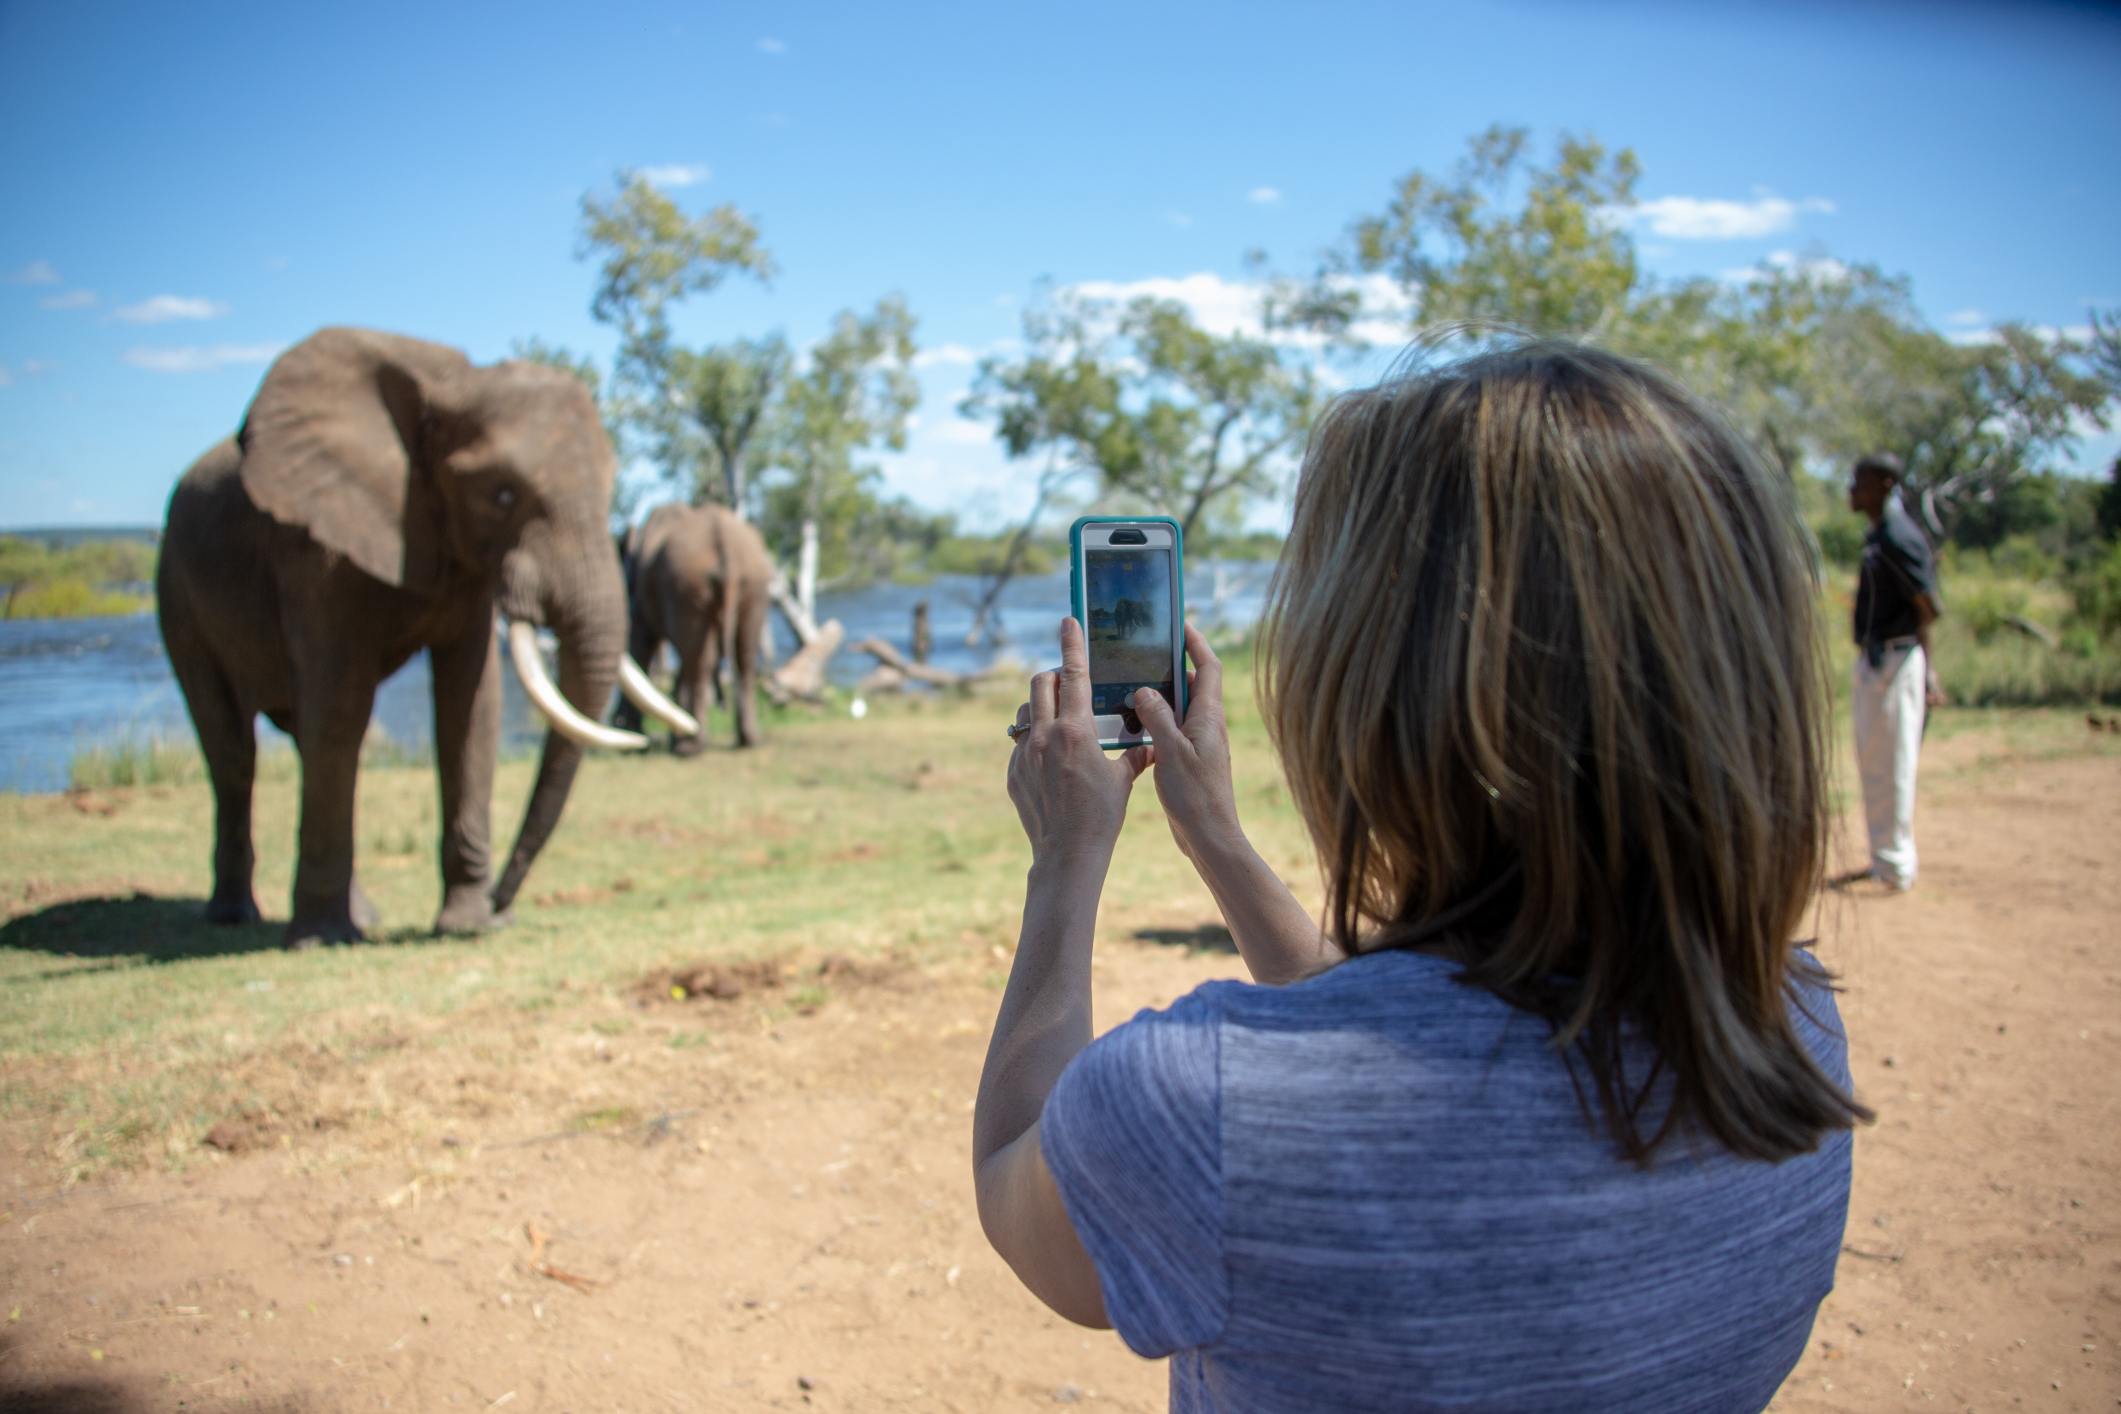 Woman taking picture during elephant safari on Corporate Incentive Trip | Global agency, BCD Meetings & Events